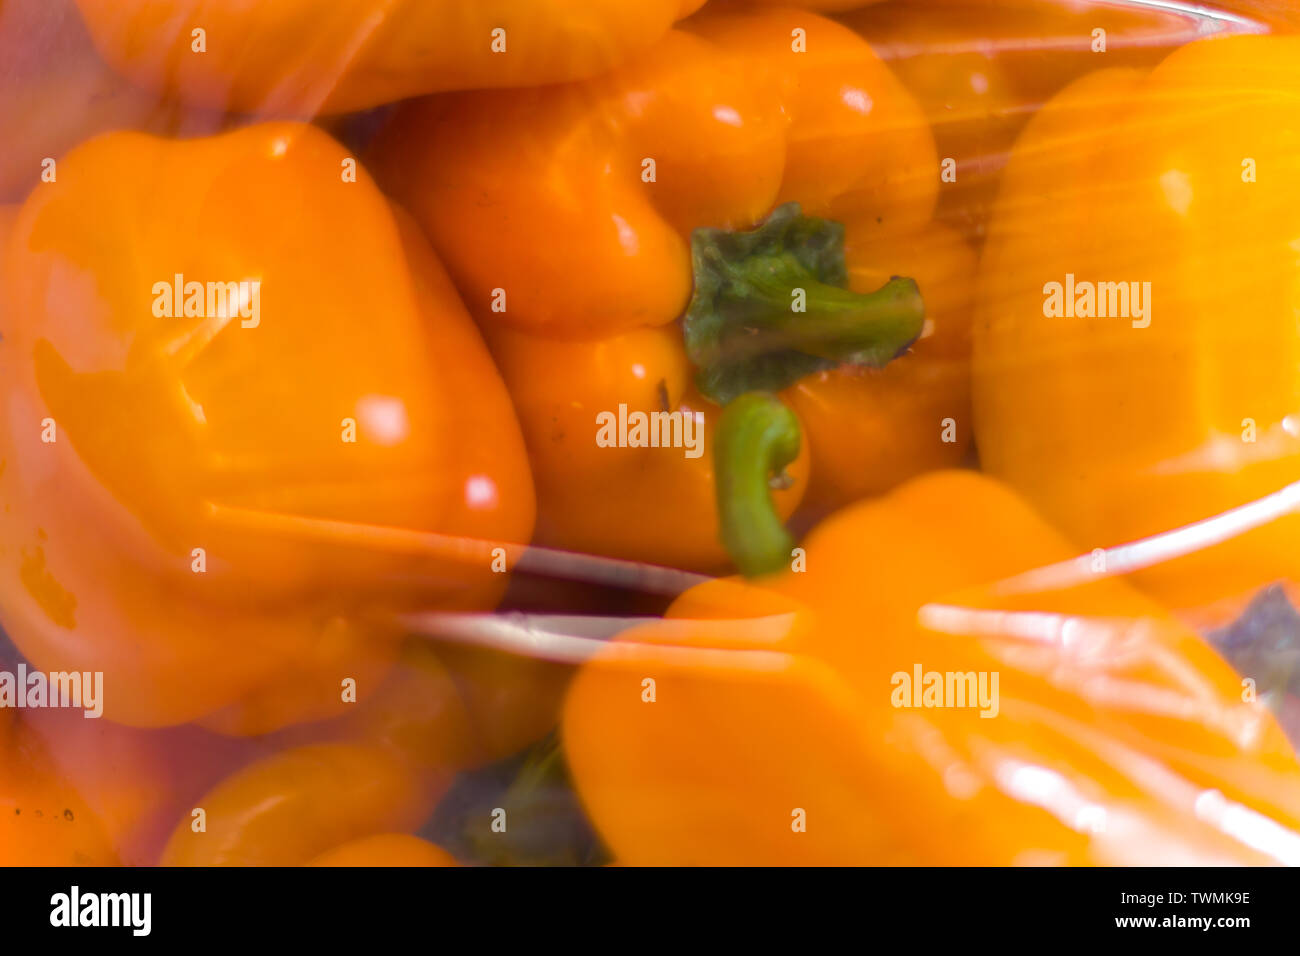 Download Fresh Yellow Bell Peppers In Plastic Bag High Resolution Image Gallery Stock Photo Alamy Yellowimages Mockups